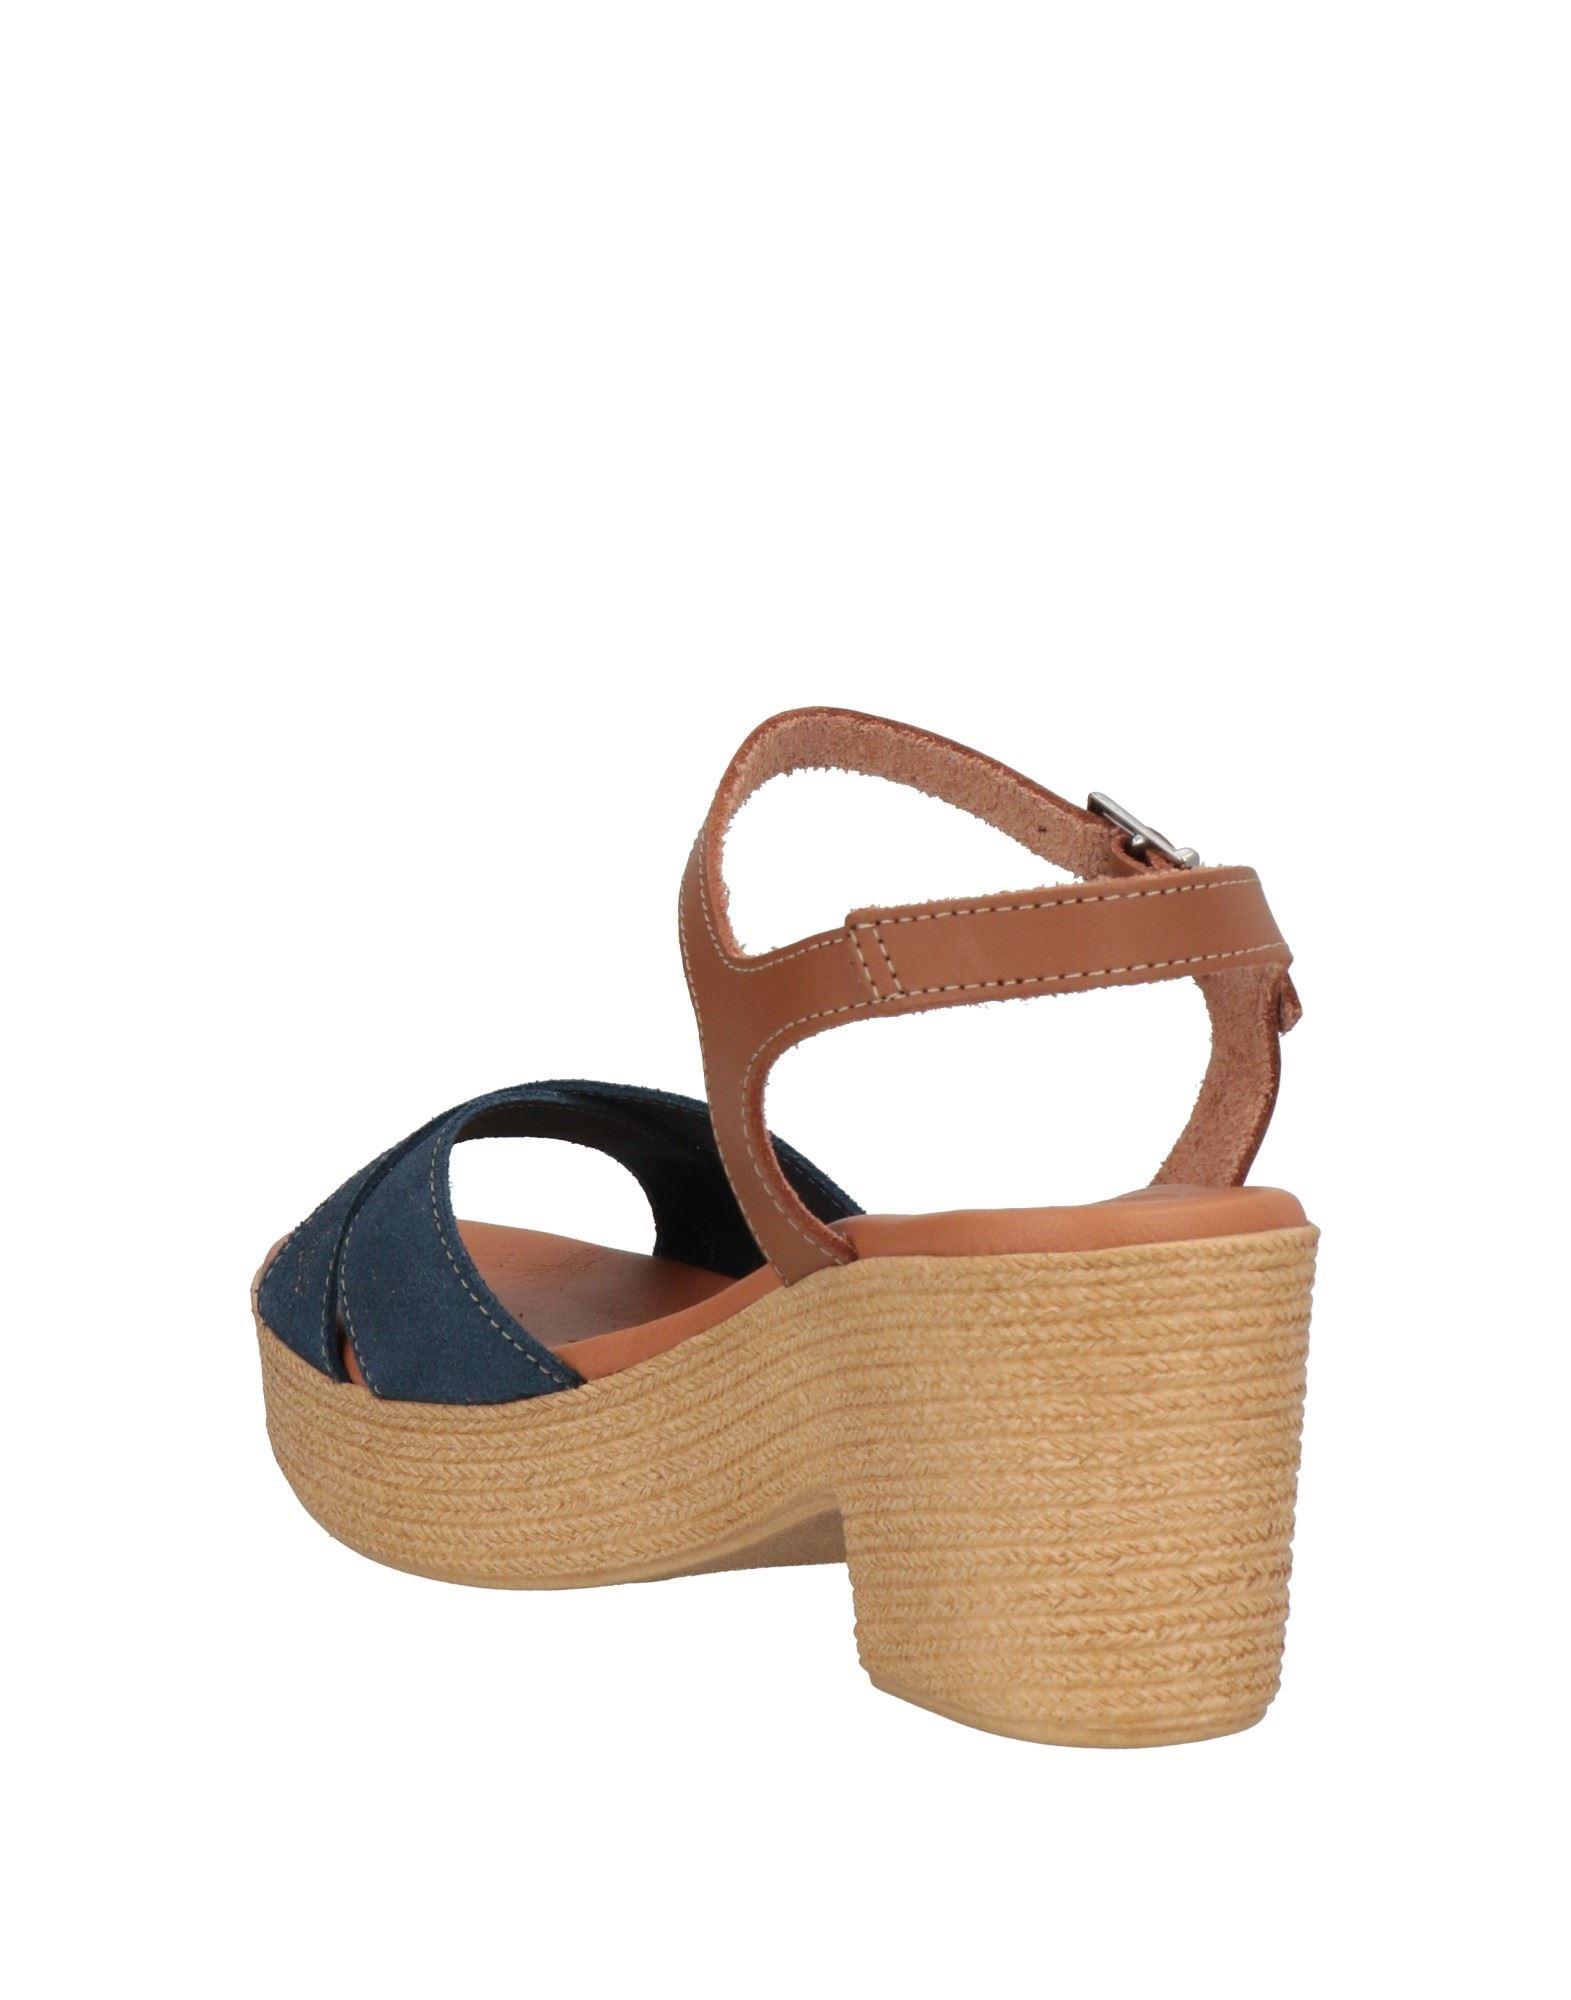 Oh My Sandals Sandals in Blue | Lyst